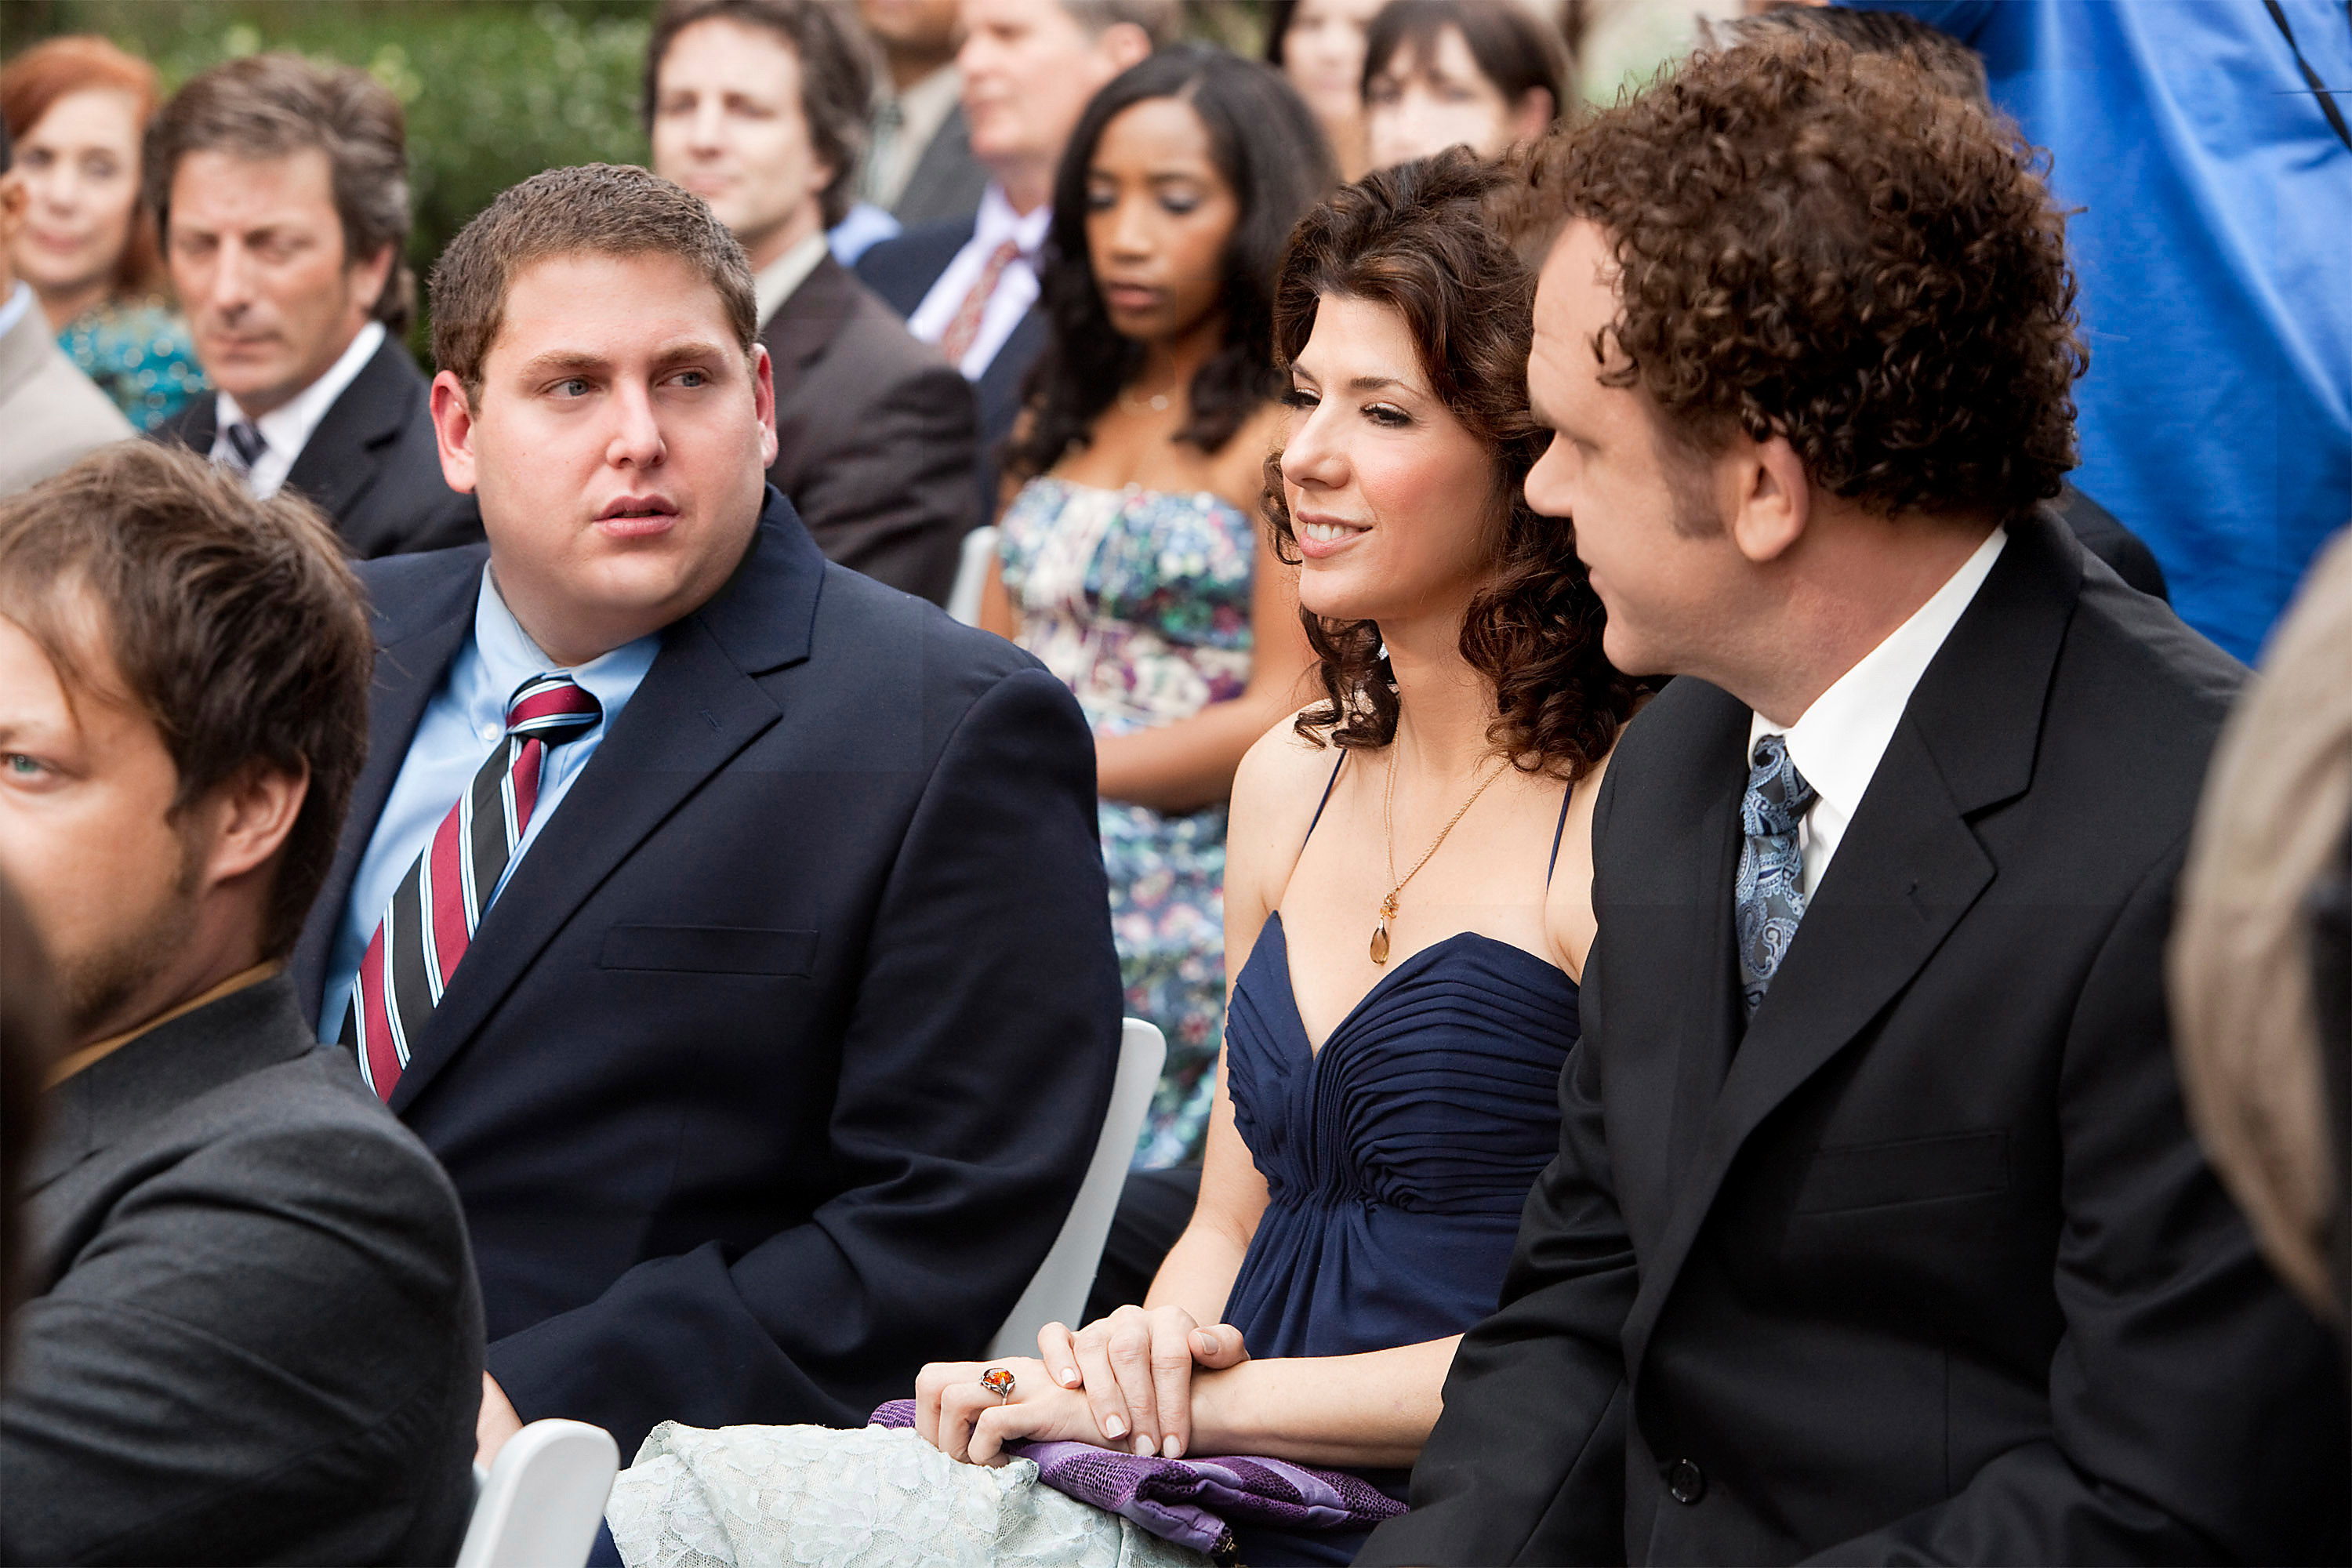 Jonah Hill, Marisa Tomei, and John C Reilly at a wedding in &quot;Cyrus&quot;